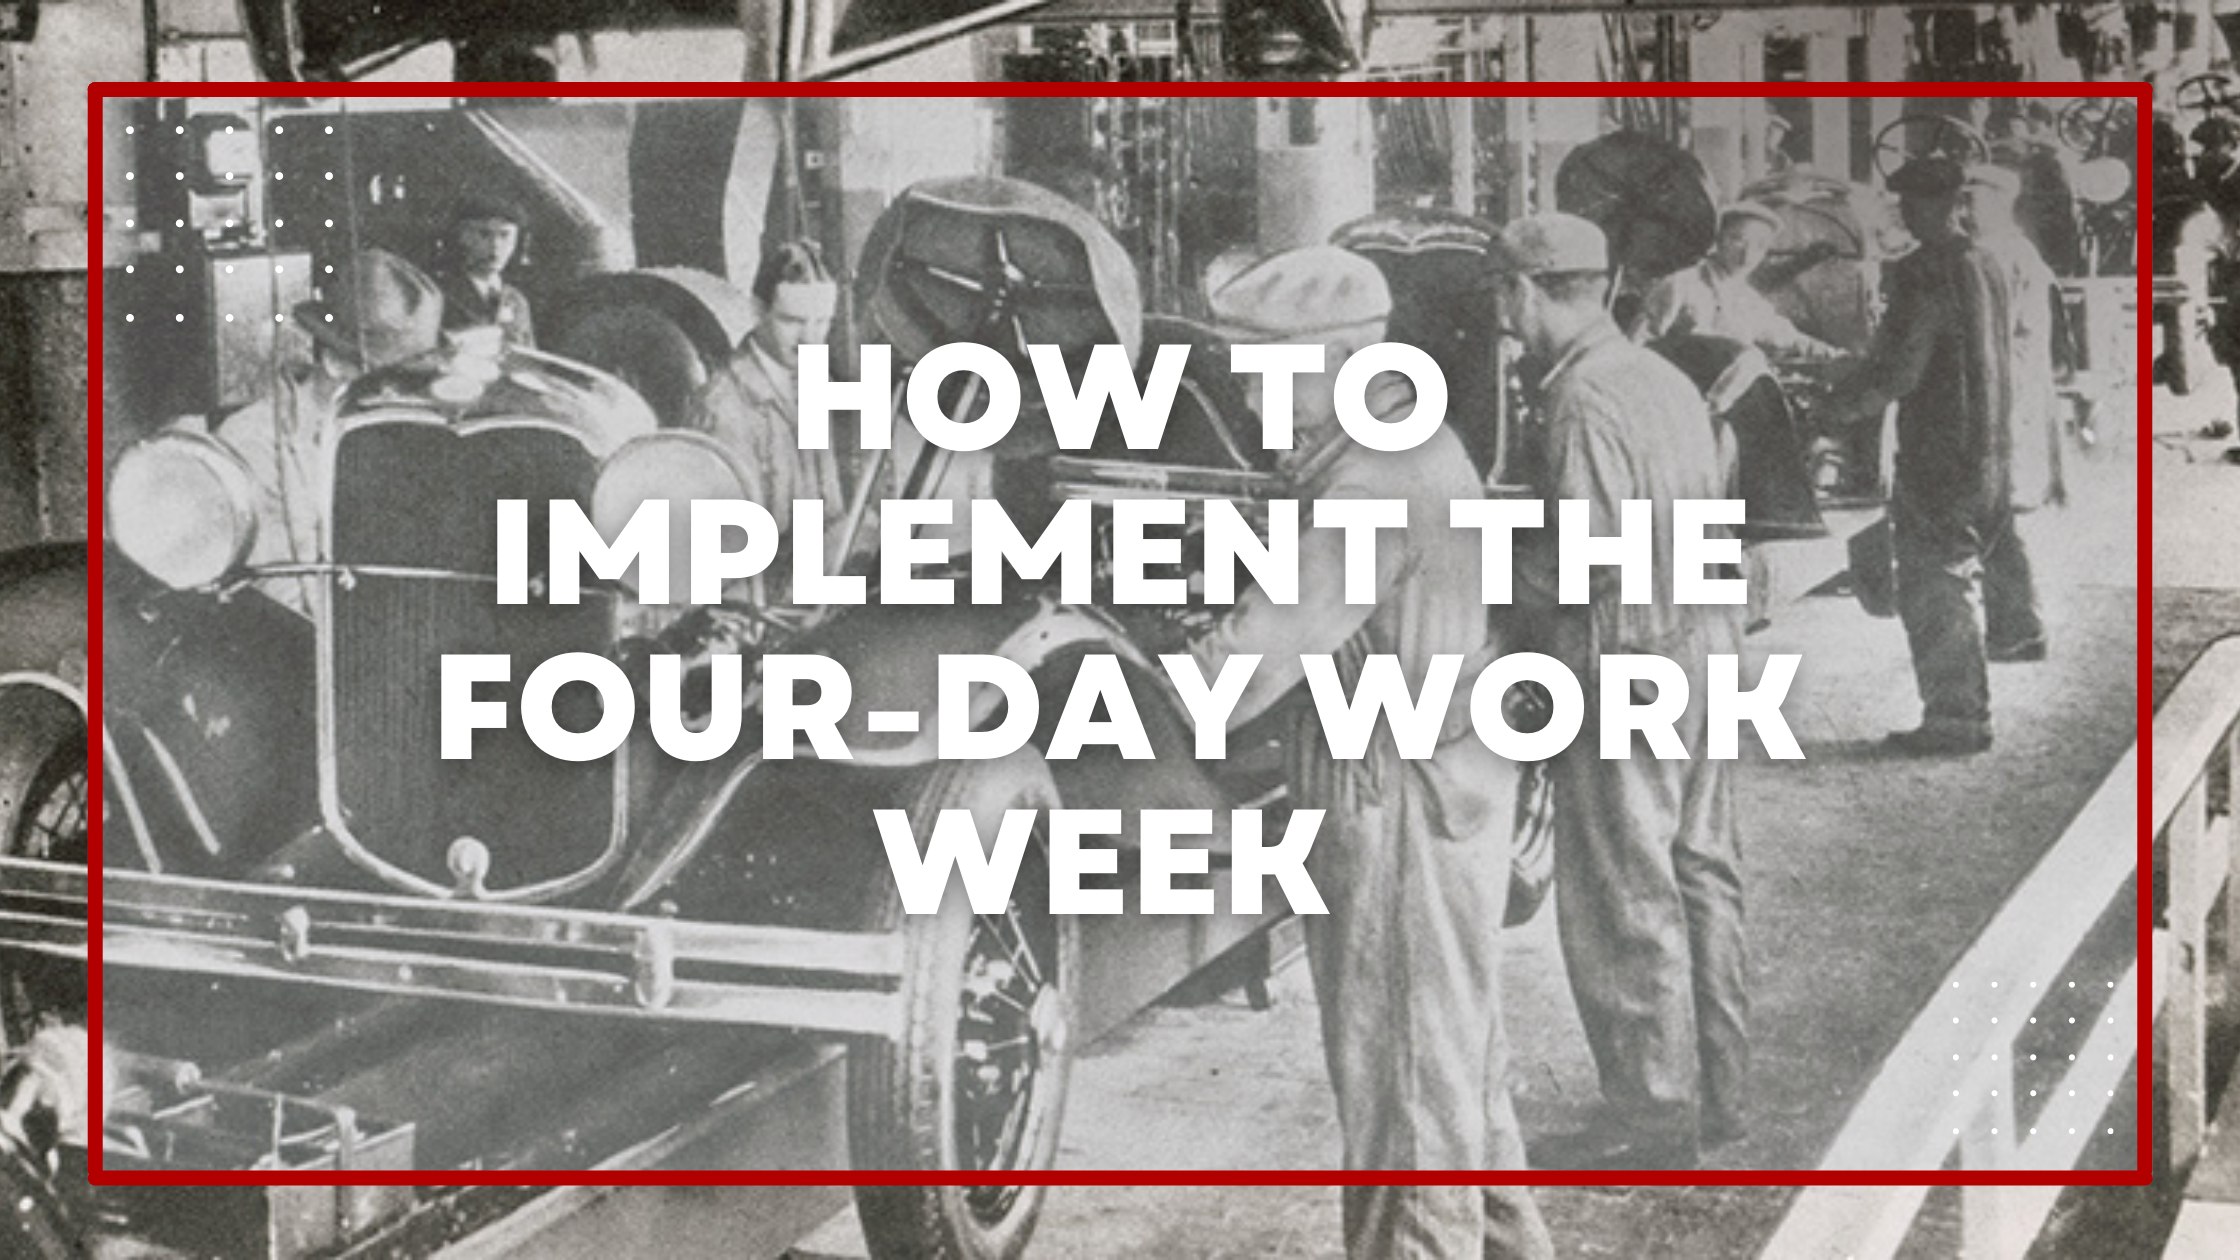 Implement 4-day work week